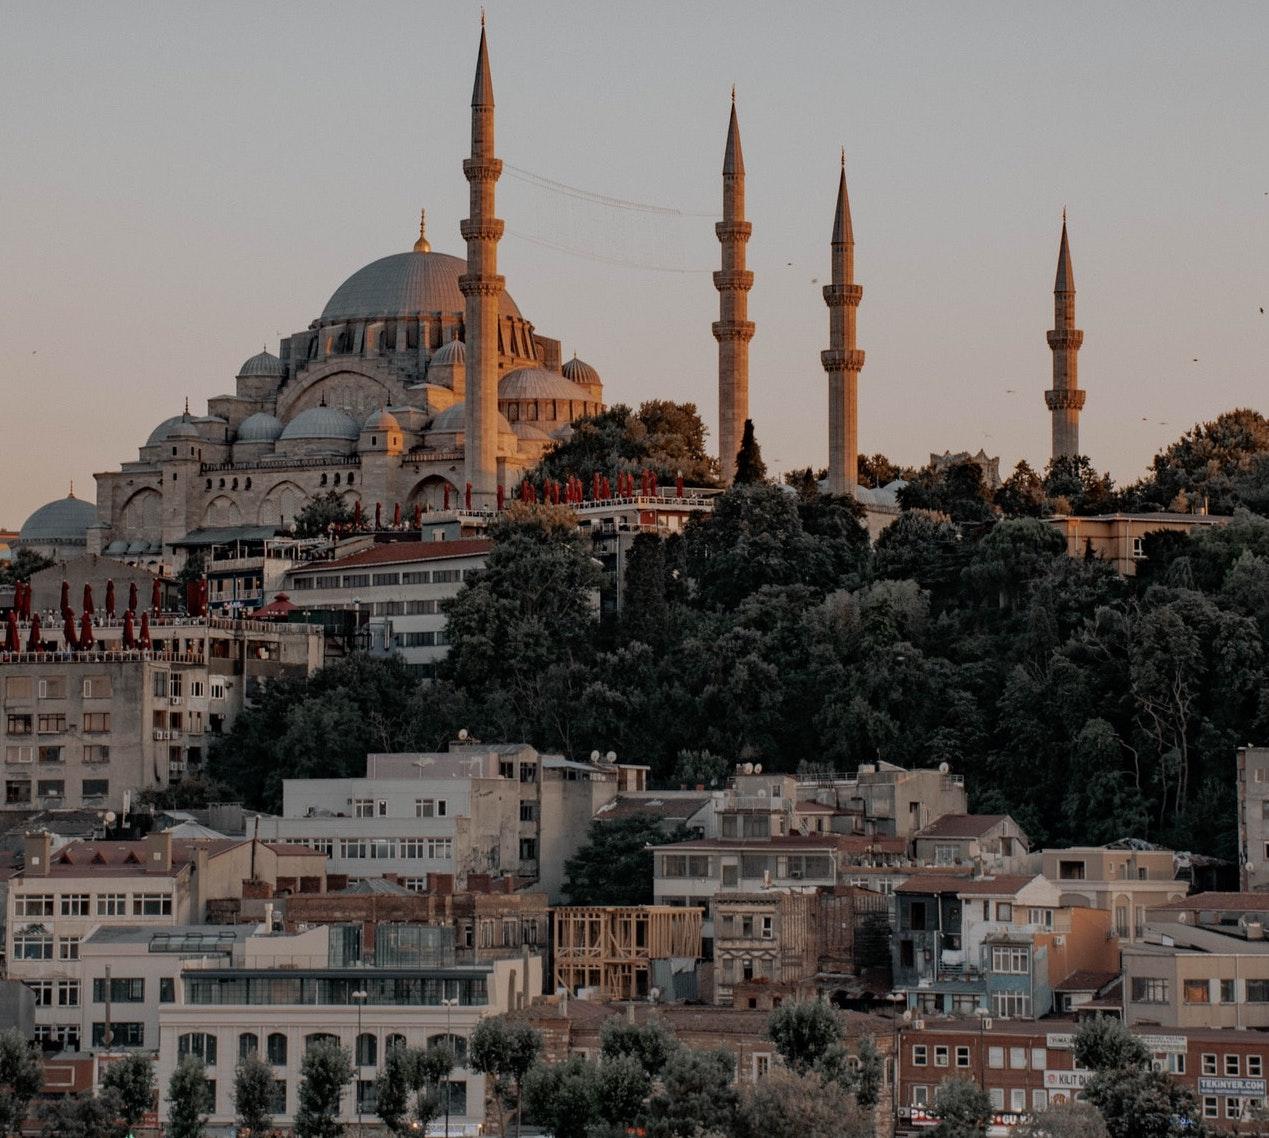 The Hagia Sophia museum was converted back into an active mosque in July. Photo: Pexels